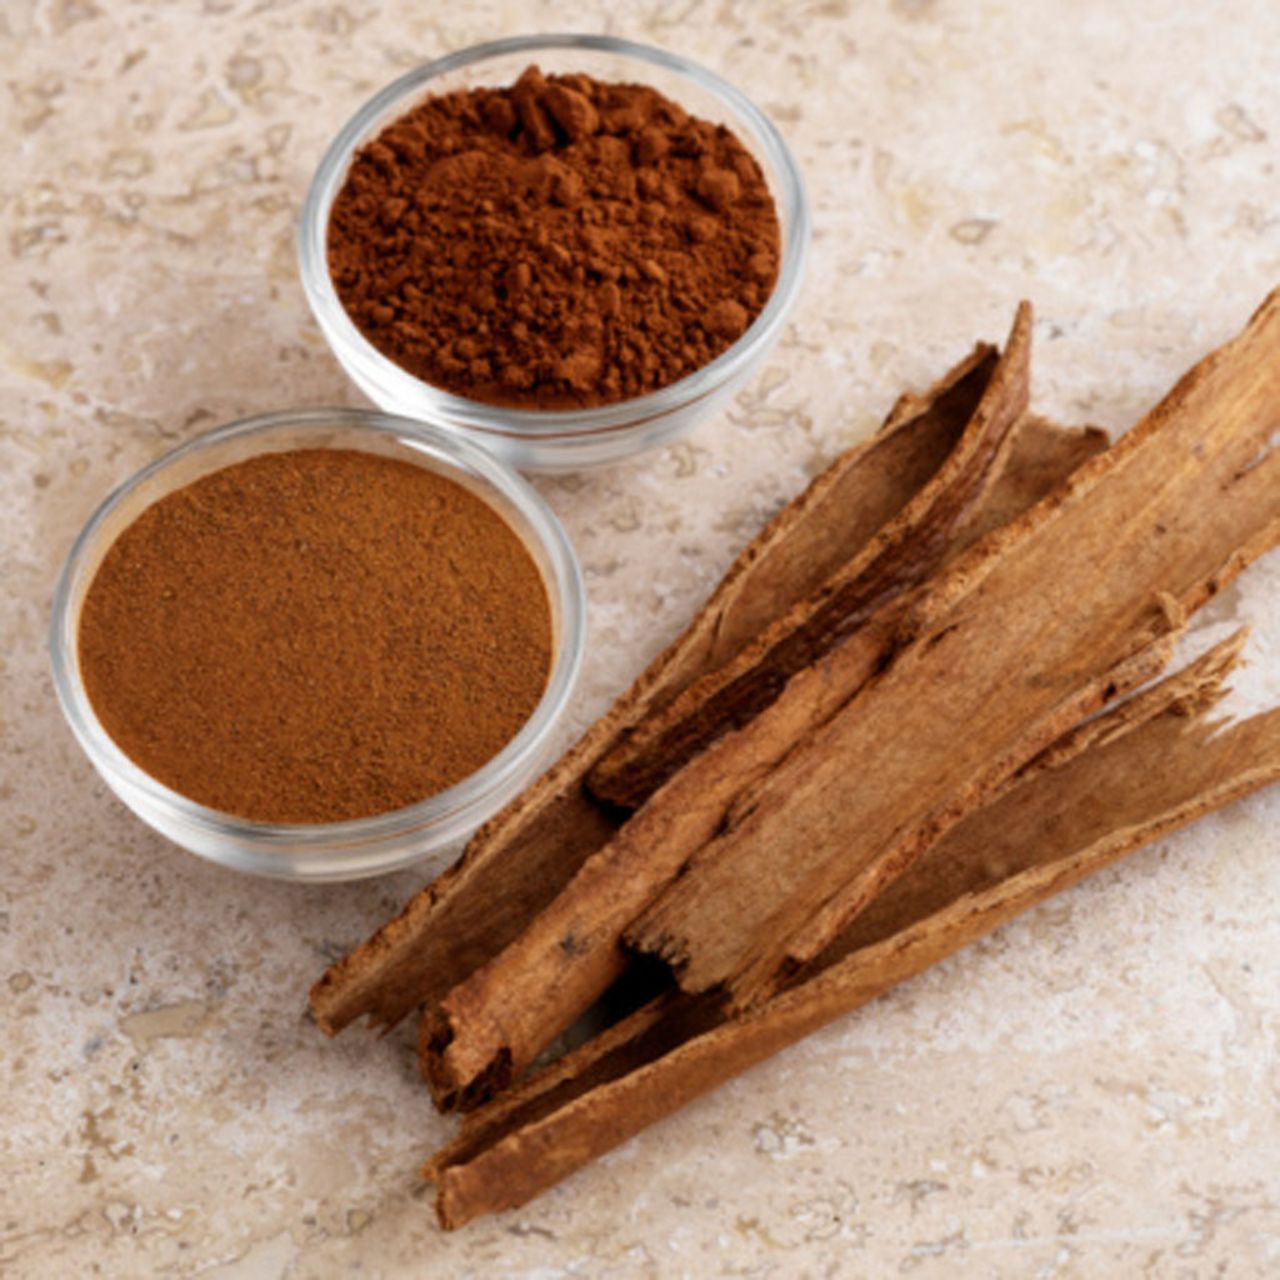 This sweet treat reduces blood sugar and LDL cholesterol (the bad kind). Studies show cinnamon can boost metabolism and increase insulin levels, lowering the chance of pre-diabetes.